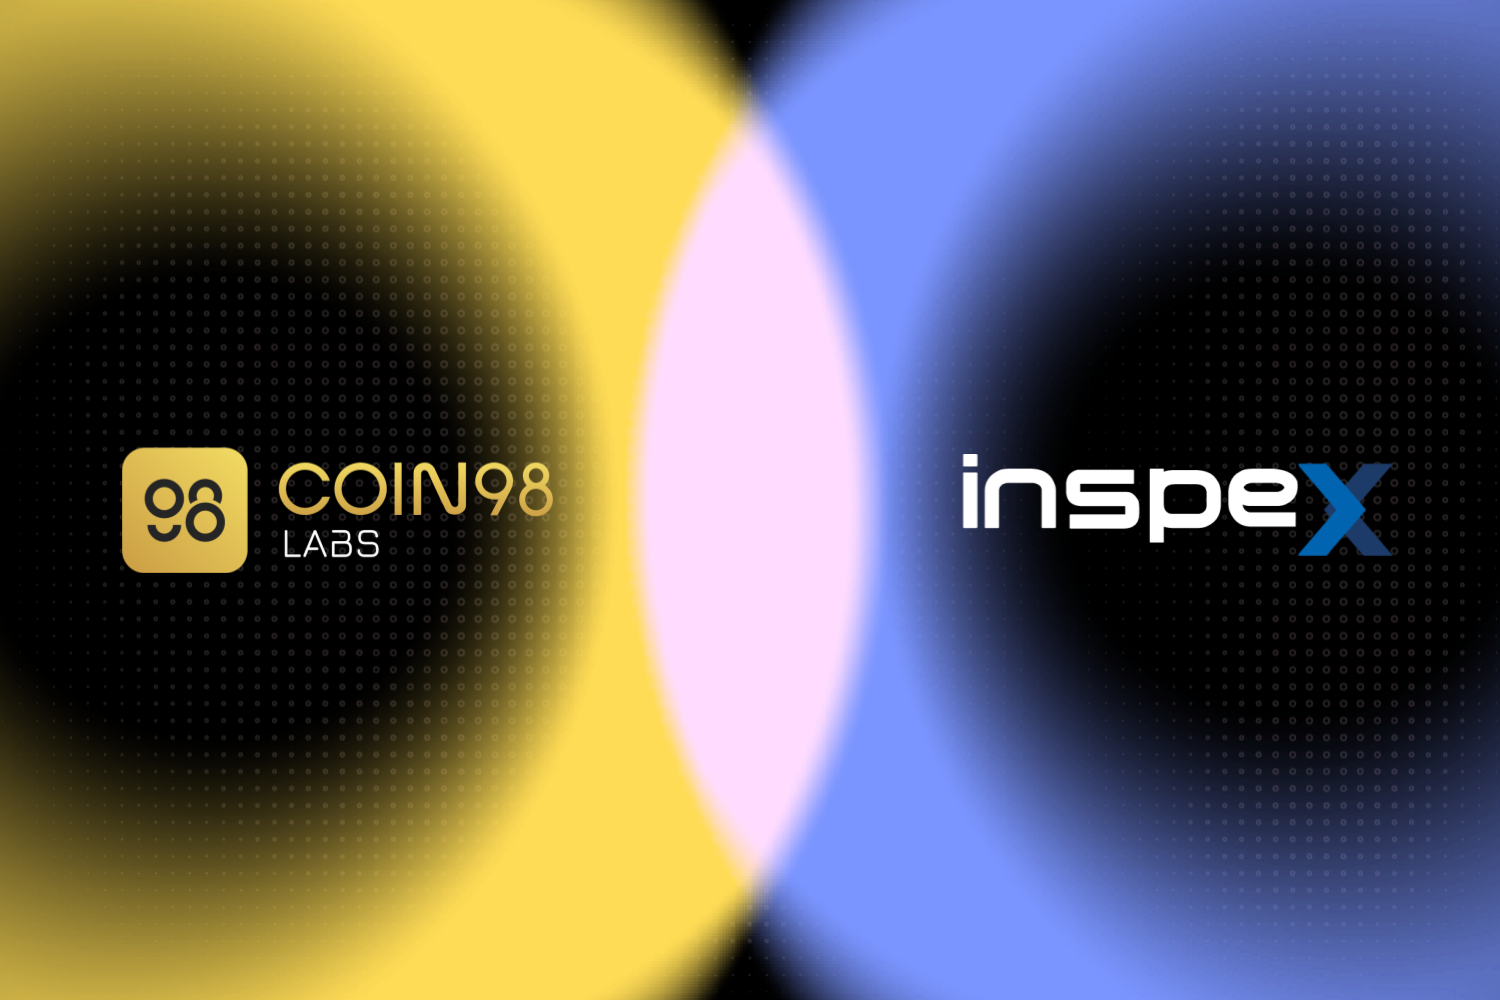 Coin98 Labs team ups with Inspex